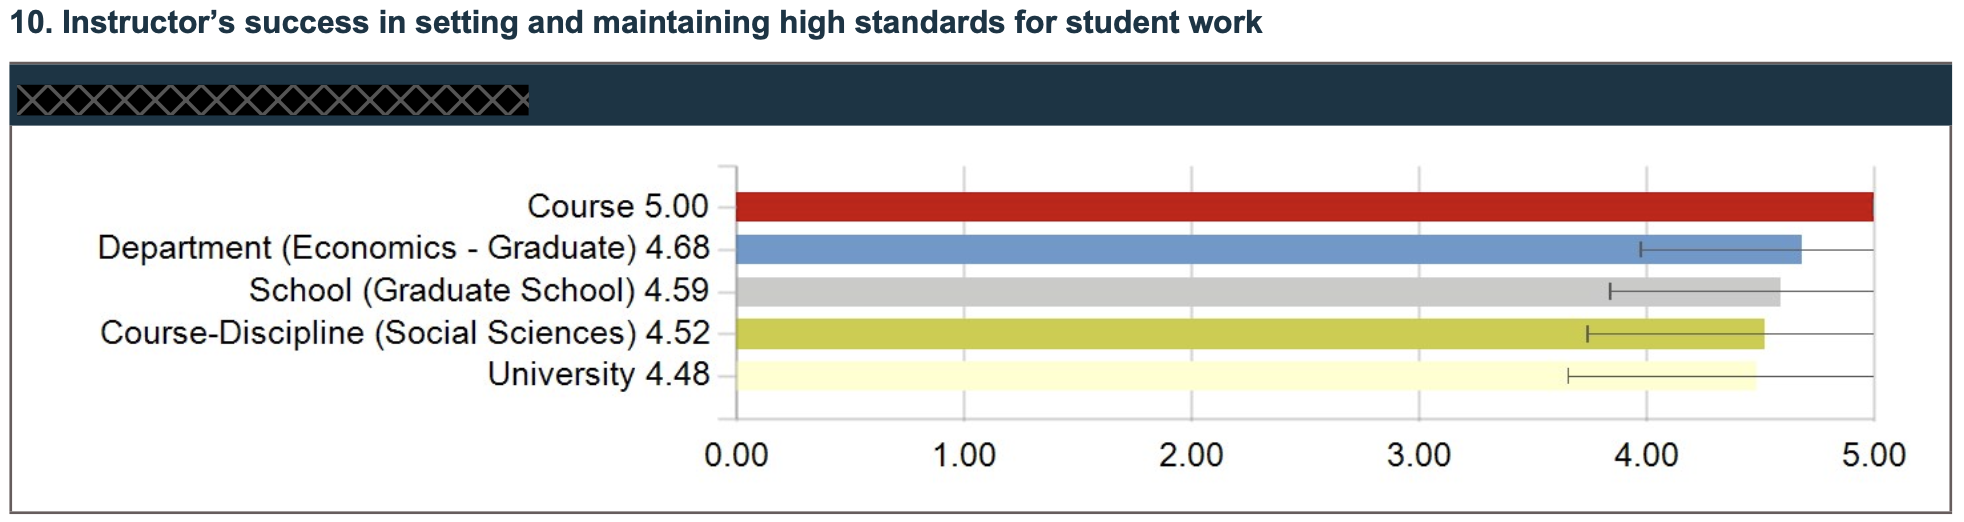 Setting and maintaining high standards for student work 5/5